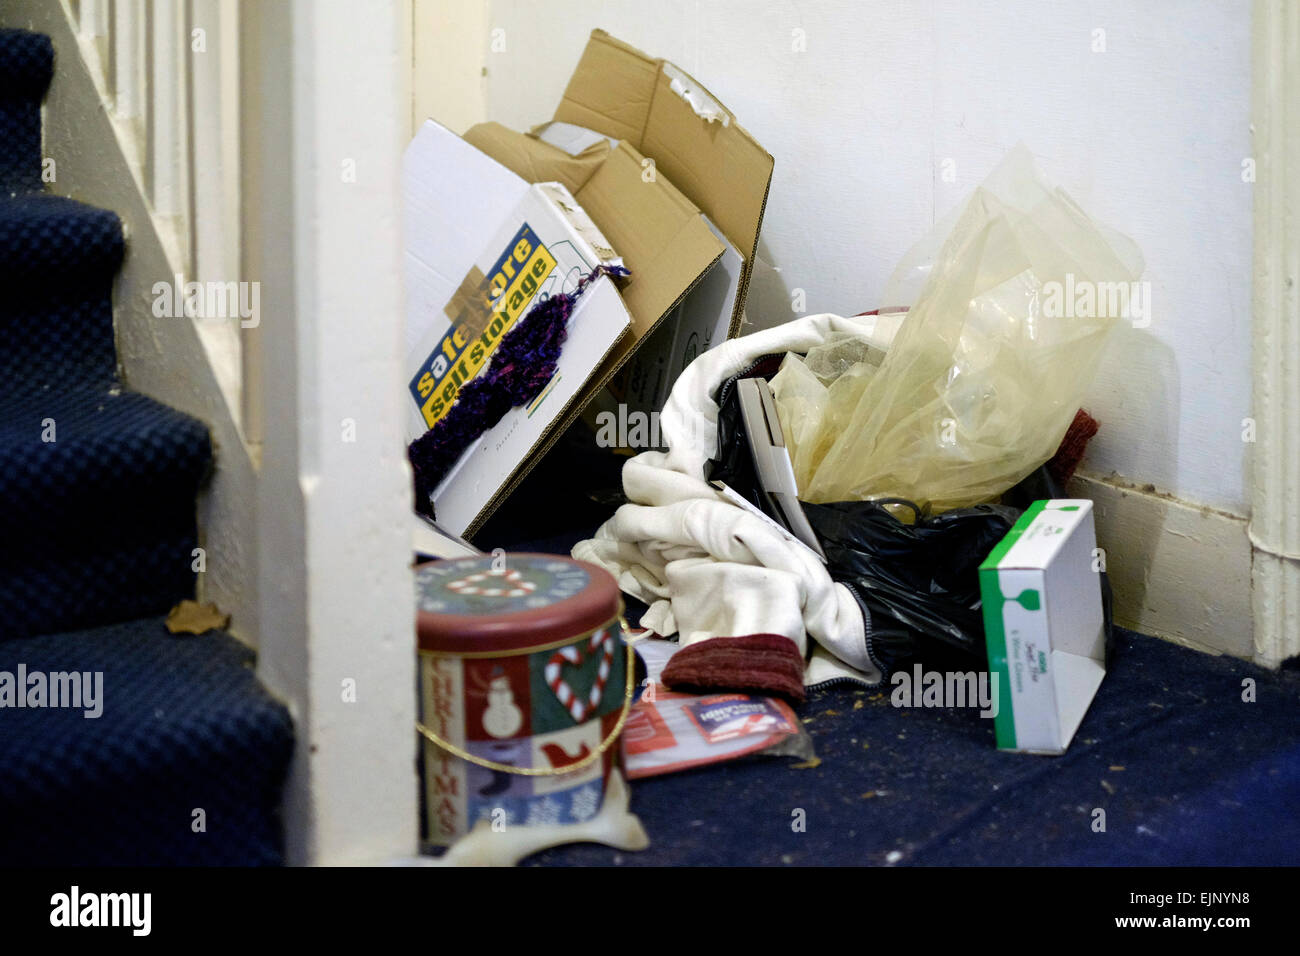 piles of rubbish left behind in a filthy left by vacating tenants Stock Photo